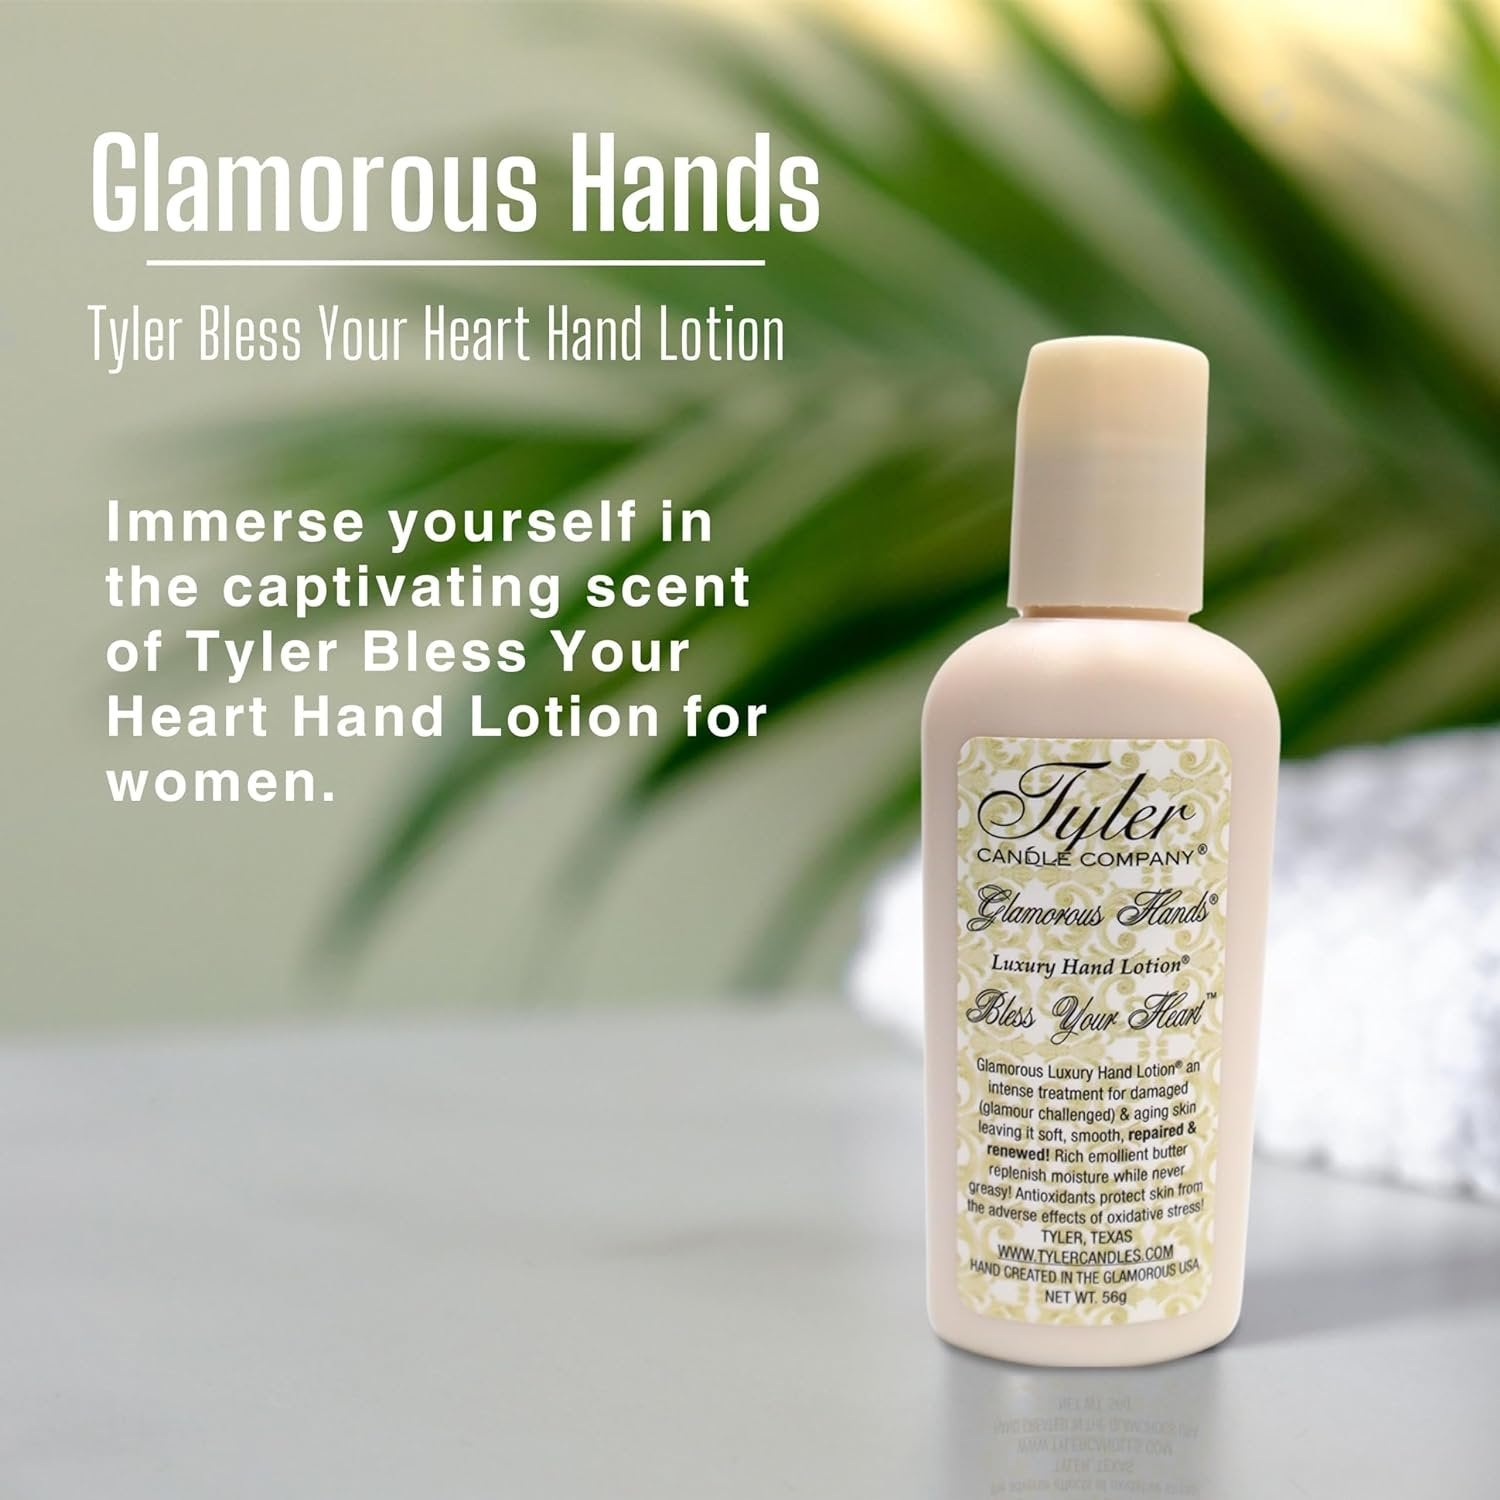 Worldwide Nutrition Bundle, 2 Items: Tyler Bless Your Heart Hand Lotion - Scented and Small Hand Cream For Dry Hands- 2 Oz Travel Size Luxury Hand Moisturizer and Multi-Purpose Key Chain